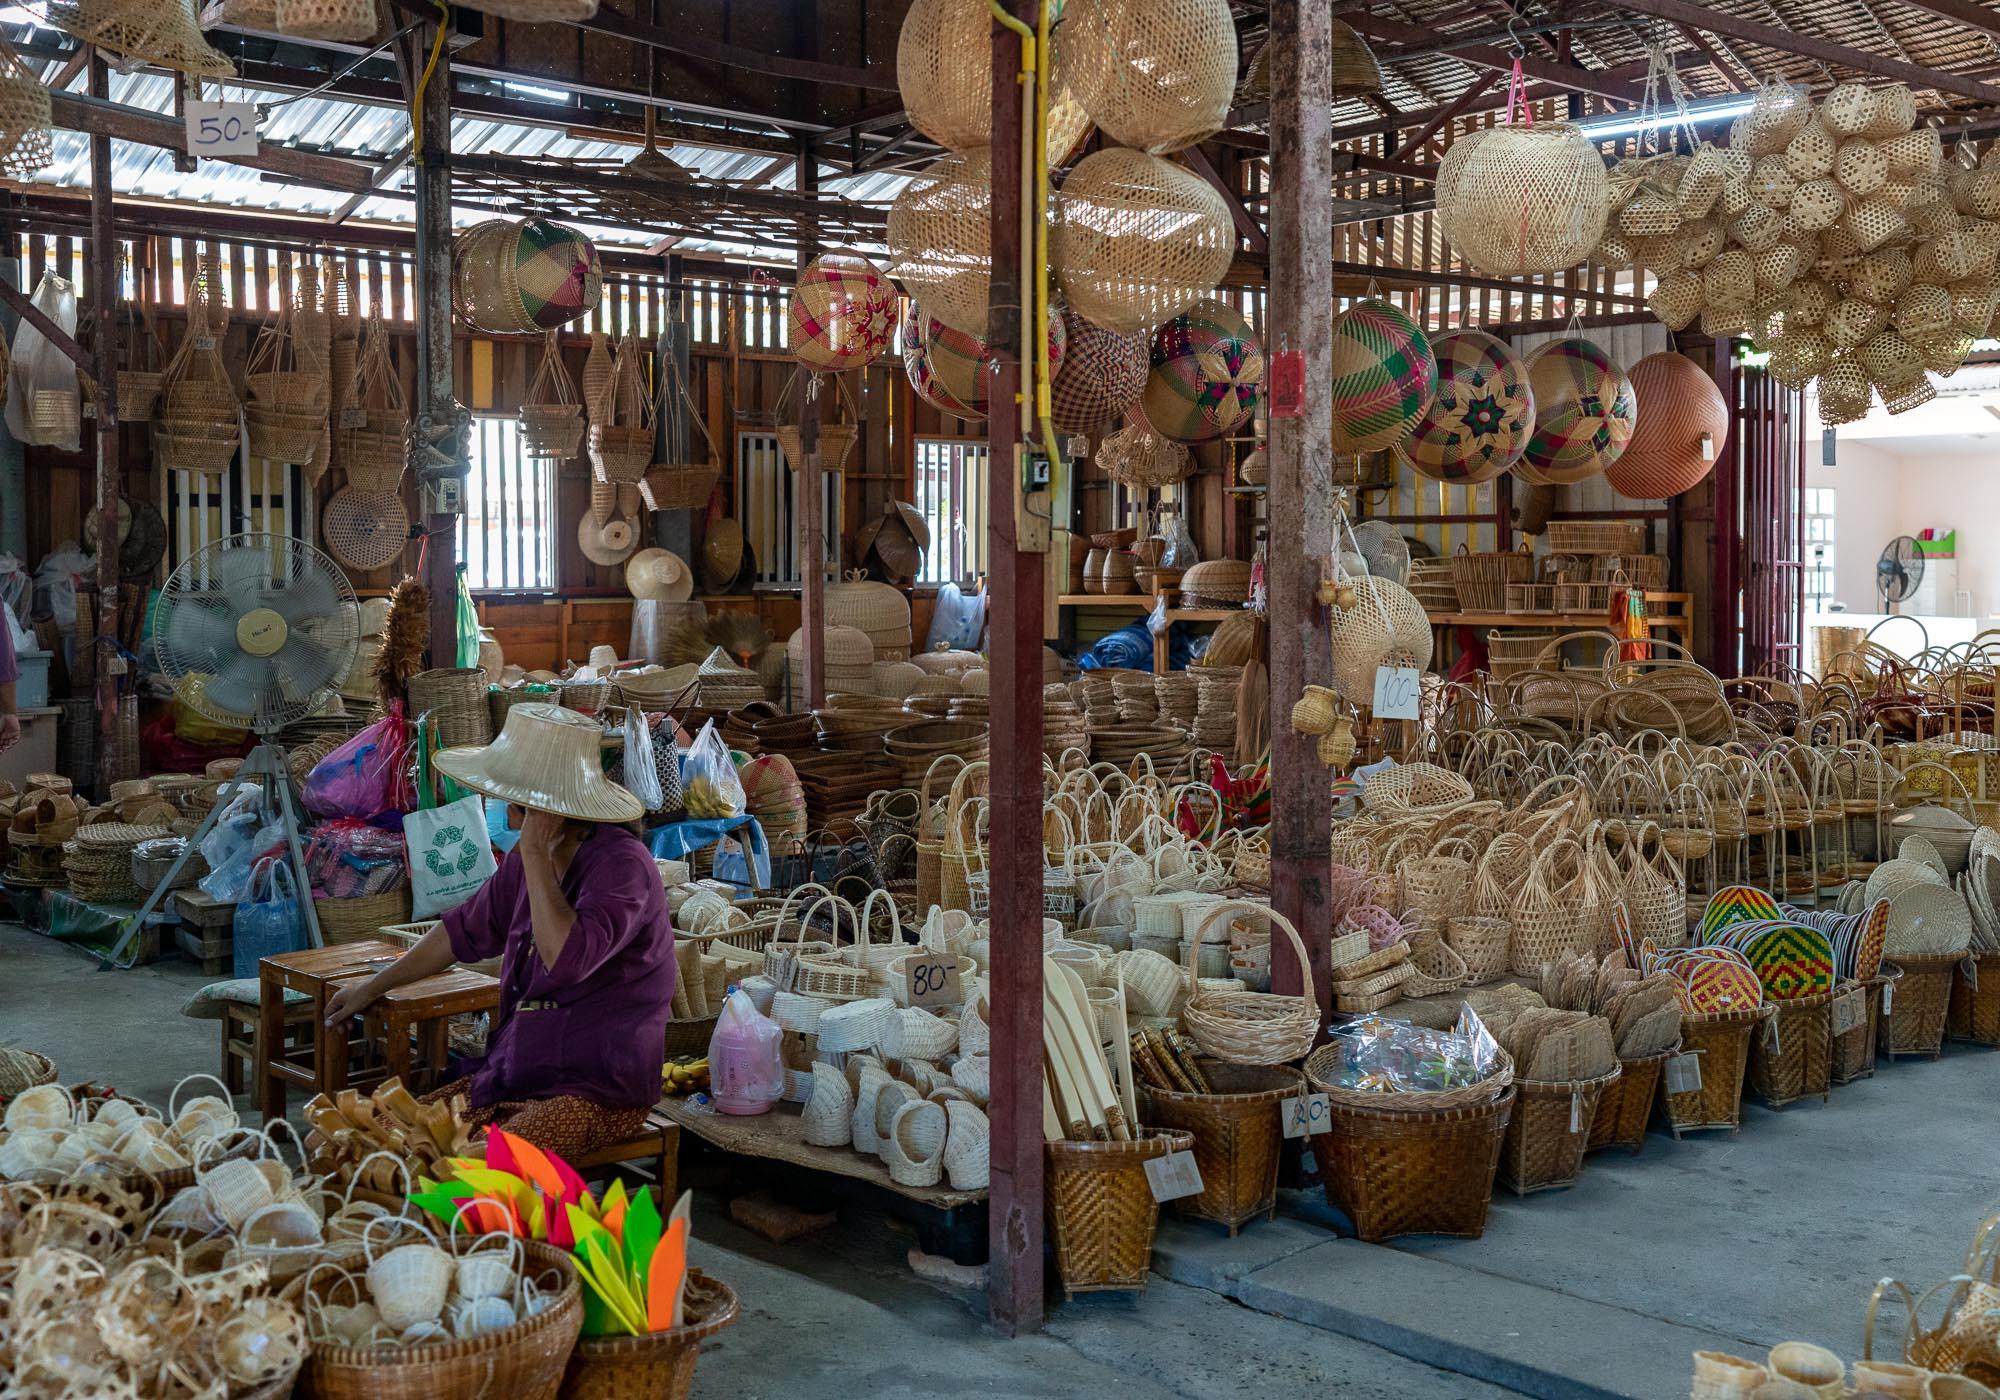 Visitors can find handmade arts and crafts for sale in the markets throughout the city. – © Michael Turtle